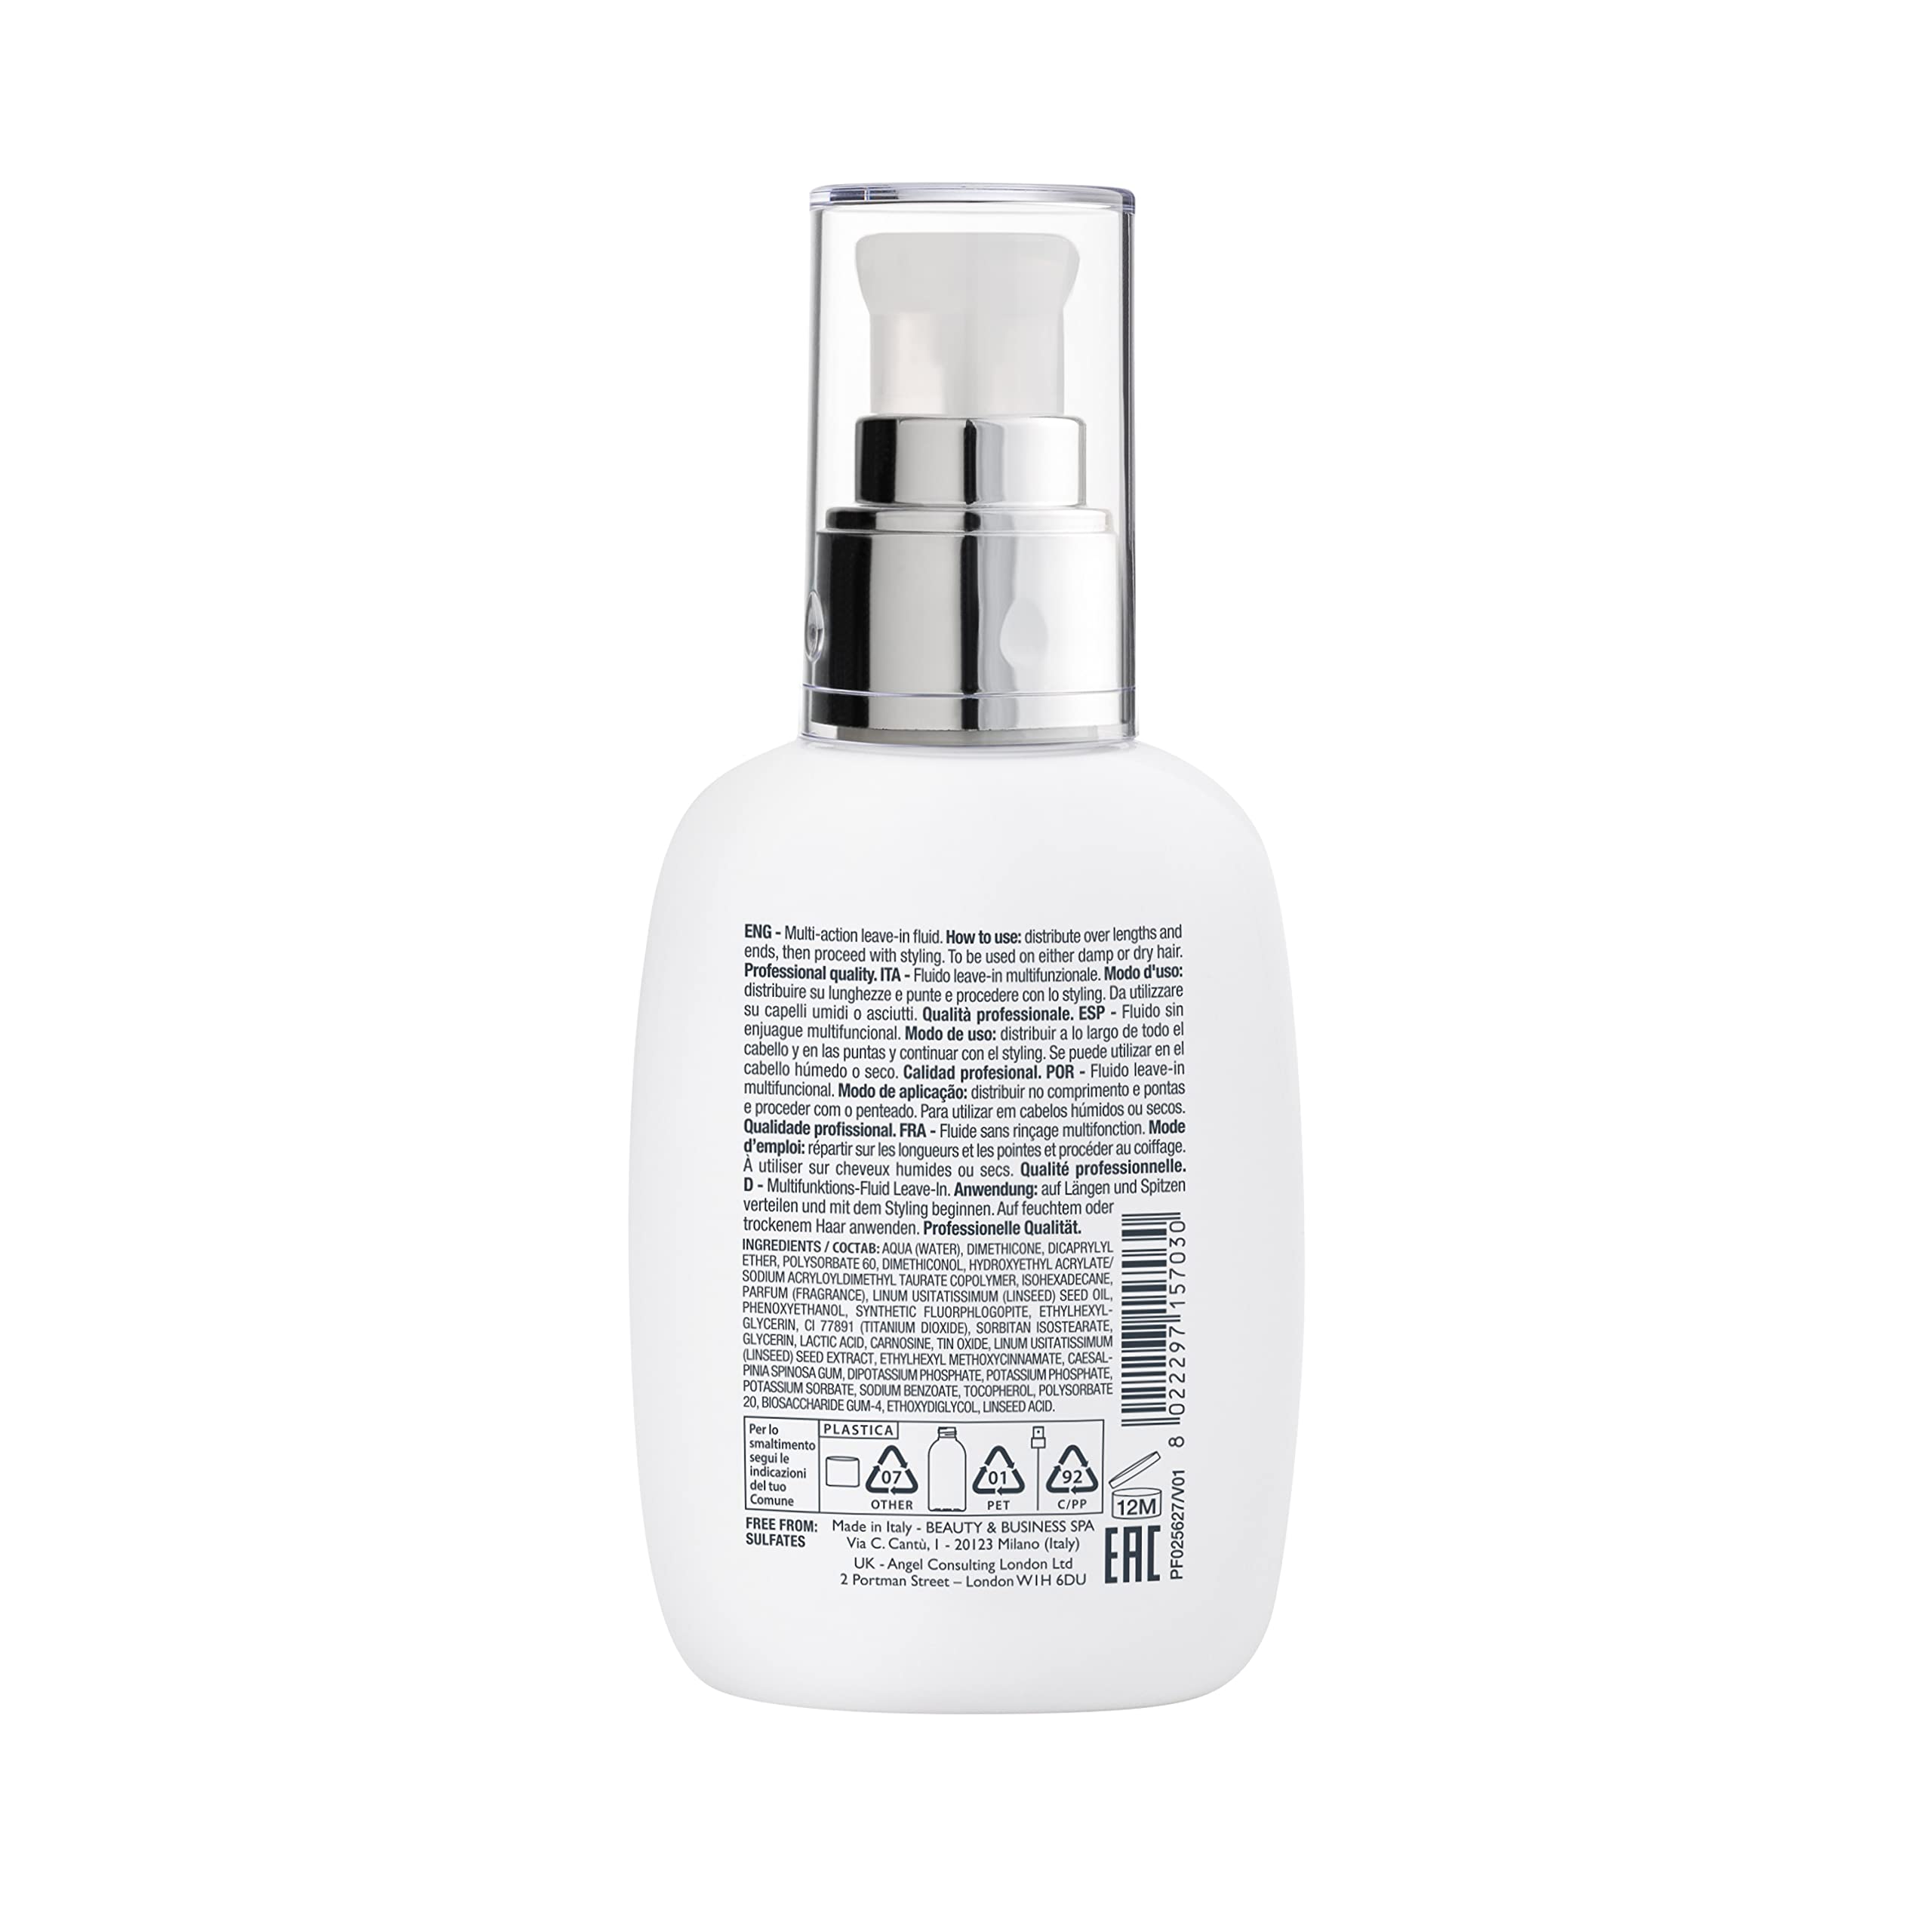 Alfaparf Milano Semi di Lino Diamond Extraordinary All-in-1 Leave-In Fluid with Thermal Protection - Detangles, Protects, Softens, Smooths, Controls, Seals Cuticles - Vegan Formula - 4.23 fl. oz.